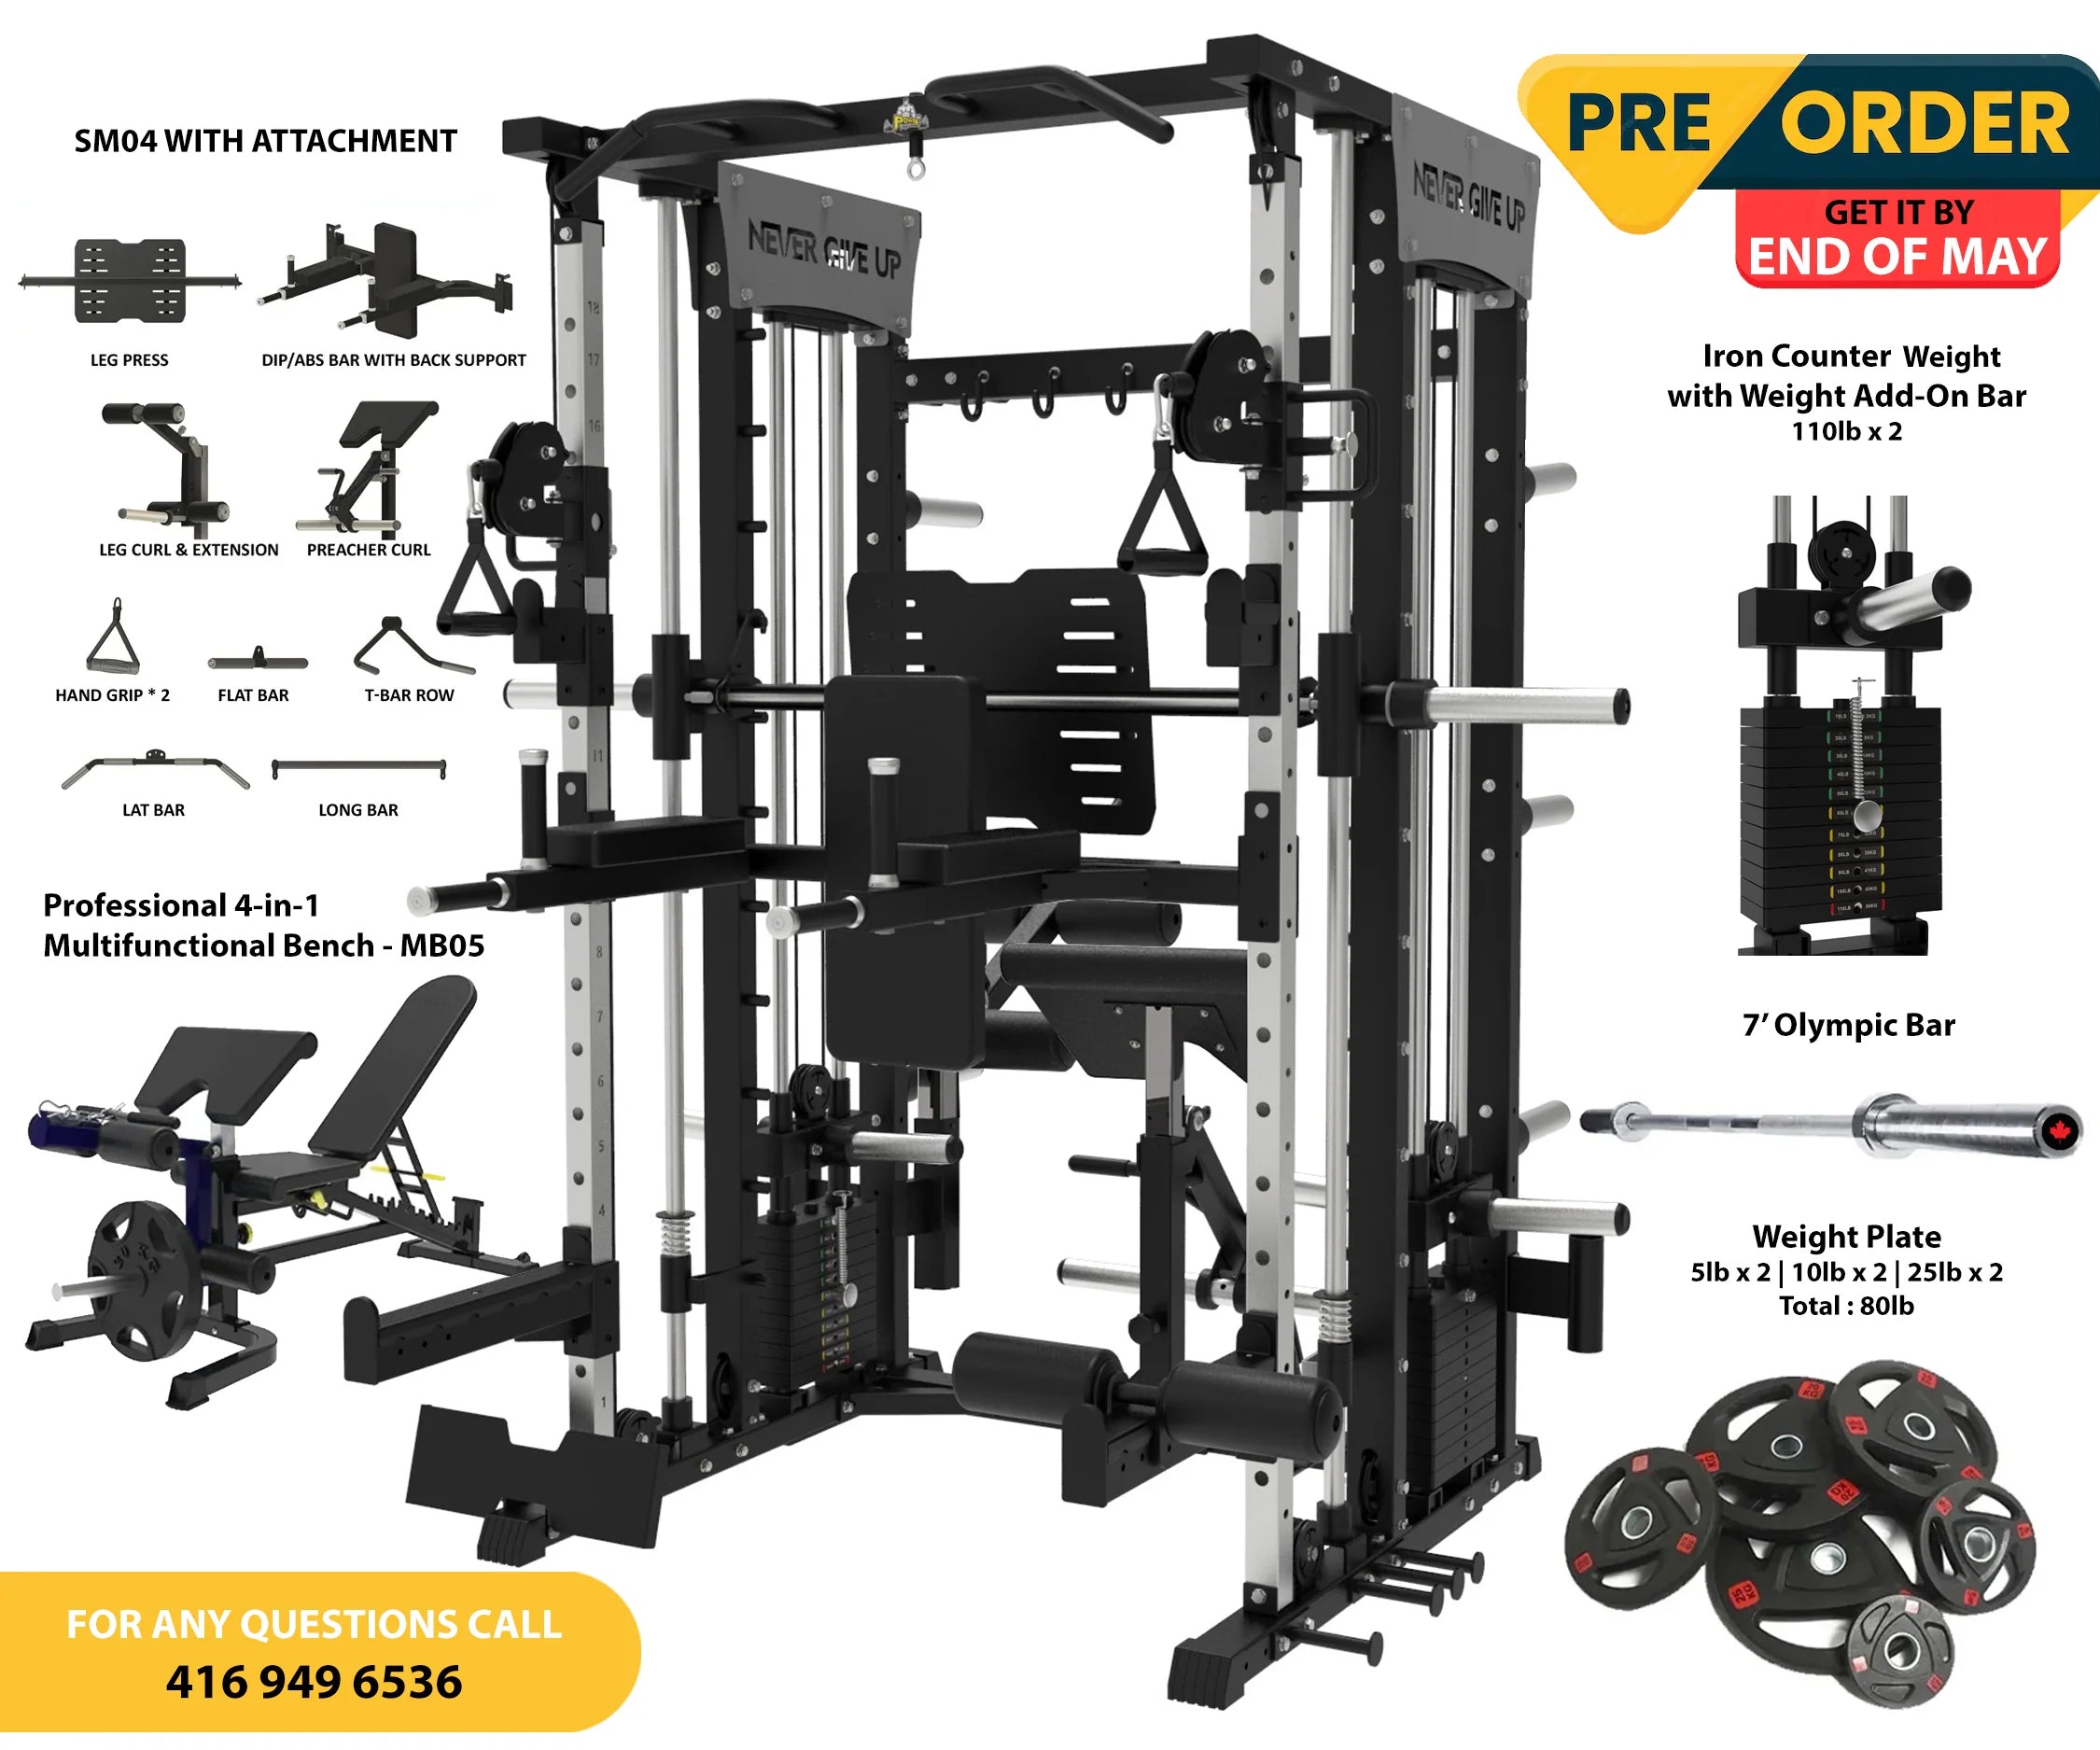 Power Pack Commercial Smith Machine - SM04 (FULLY LOADED - PRE ORDER DEAL)